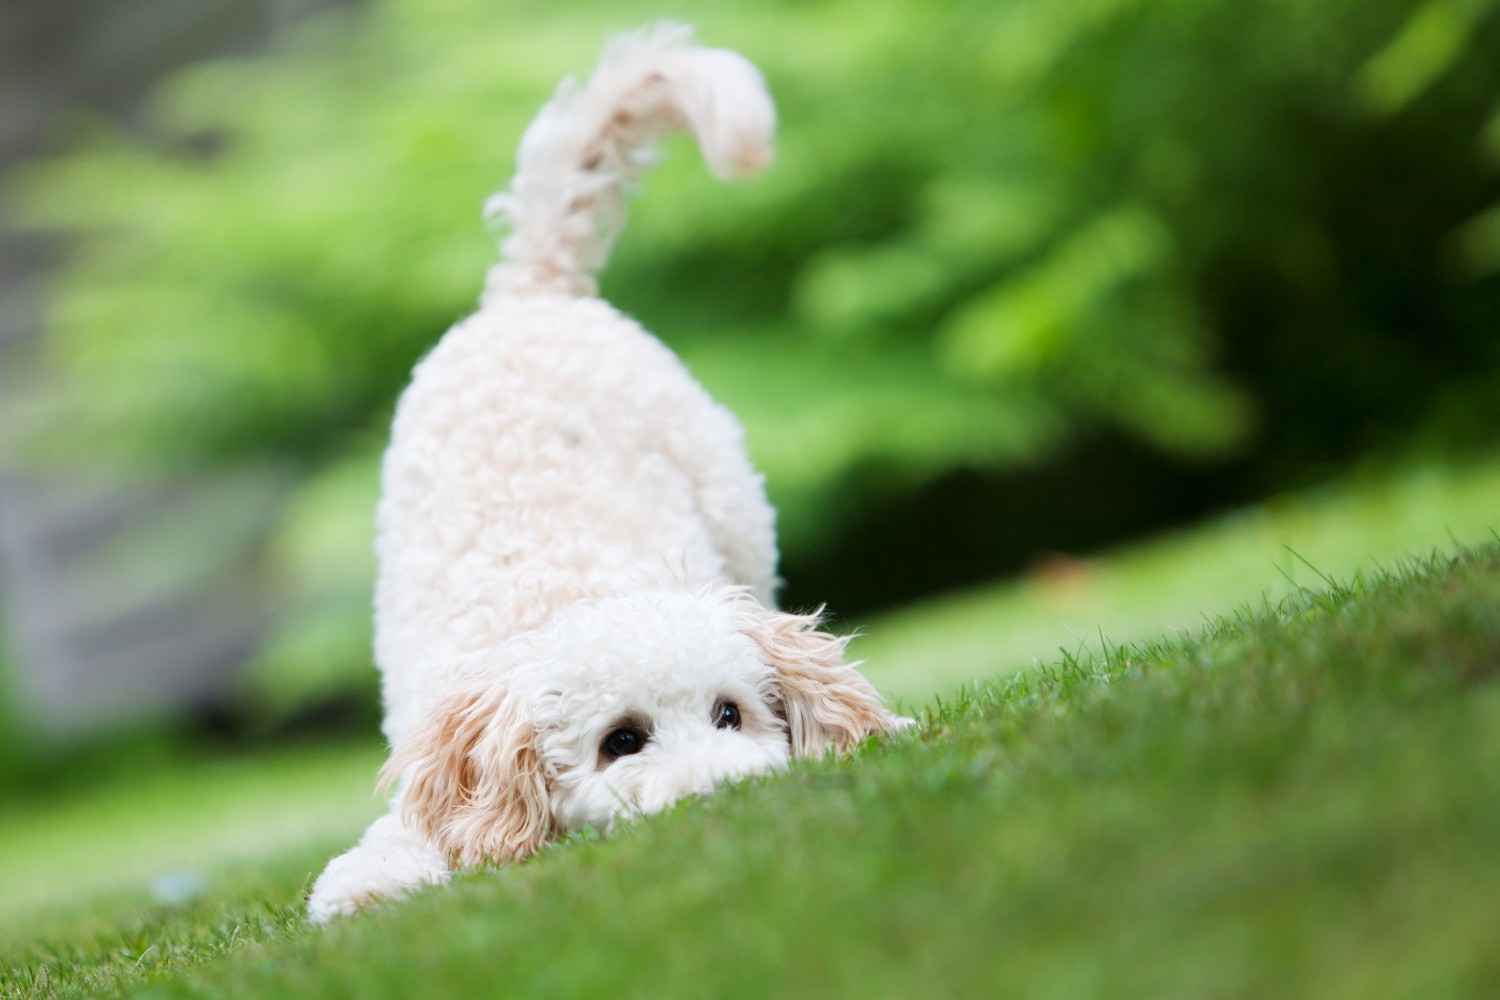 White dog playing in grass